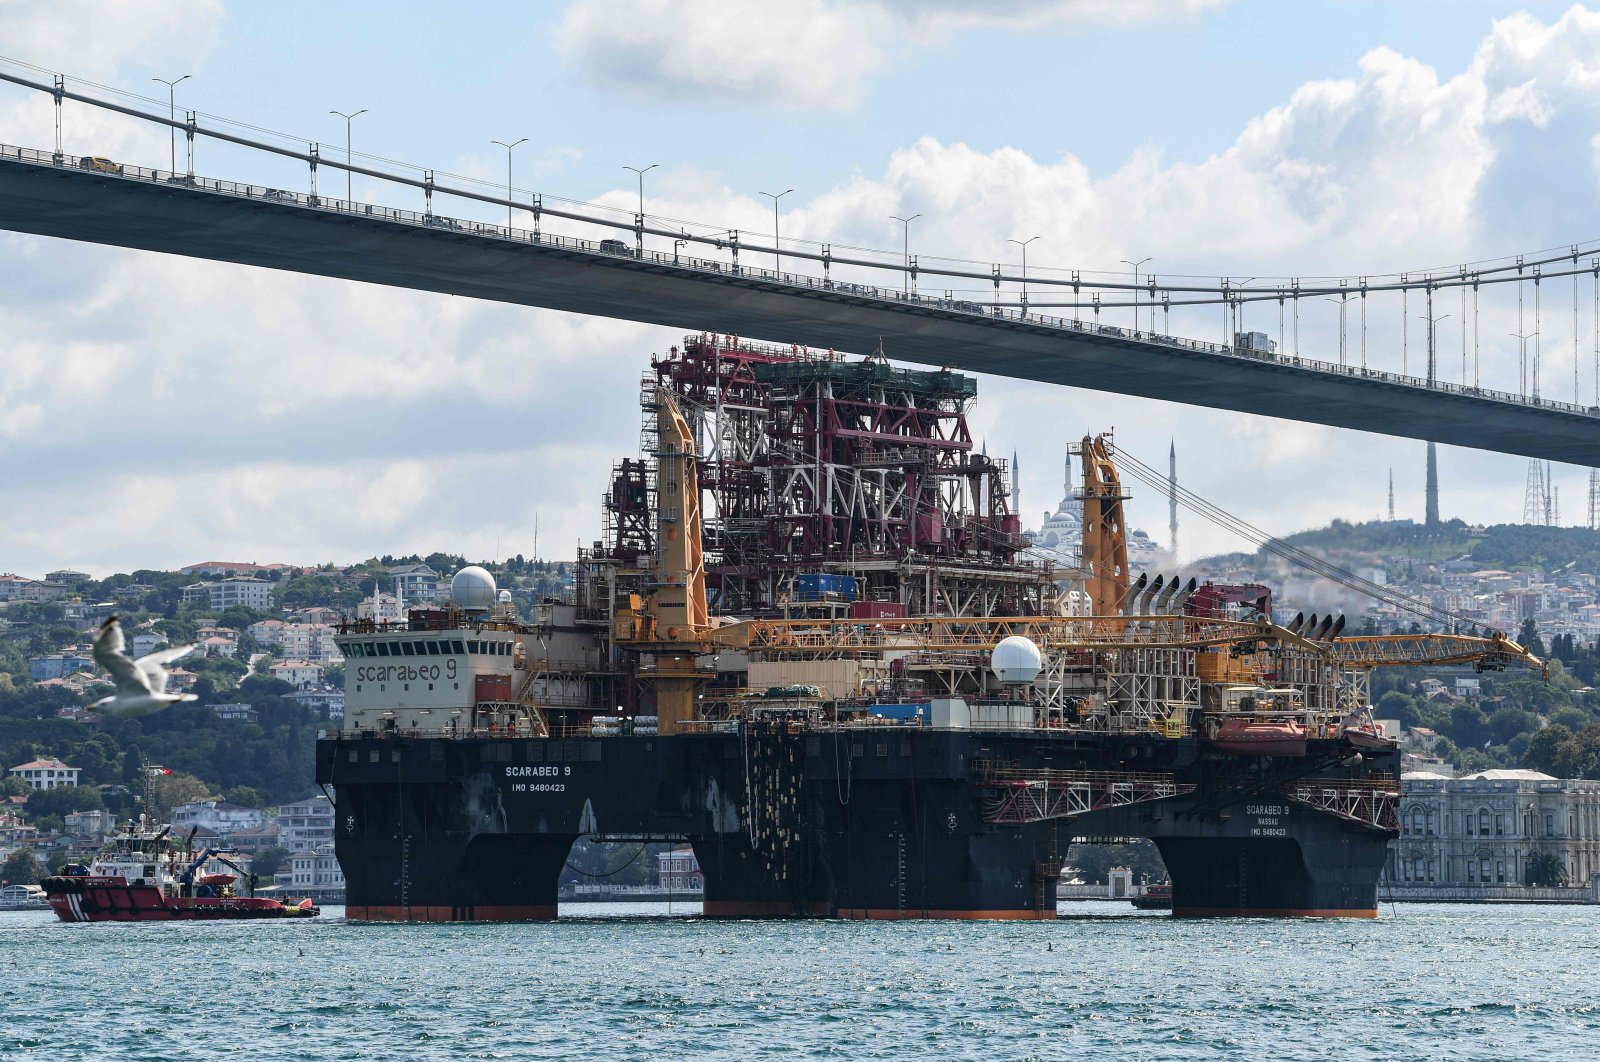 Scarabeo 9, a 115-meter-long and 78-meter-high Frigstad D90-type semi-submersible drilling rig, passes under the July 15th Martyrs Bridge on the Bosphorus Strait en route to the Black Sea, Istanbul, Turkey, Aug. 29, 2019. (AFP Photo)